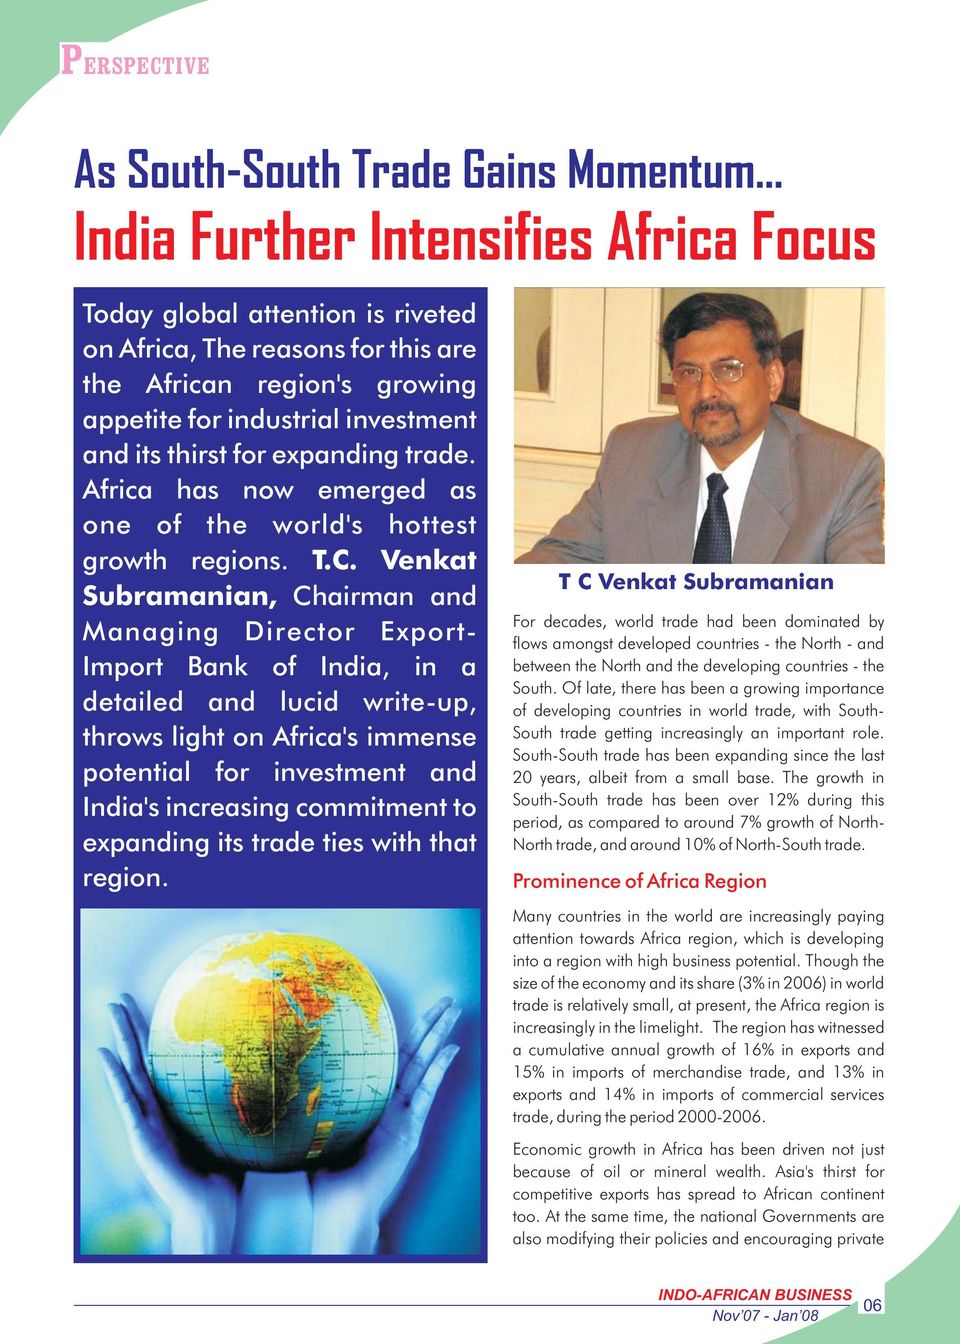 Venkat Subramanian, Chairman and Managing Director Export- Import Bank of India, in a detailed and lucid write-up, throws light on Africa's immense potential for investment and India's increasing